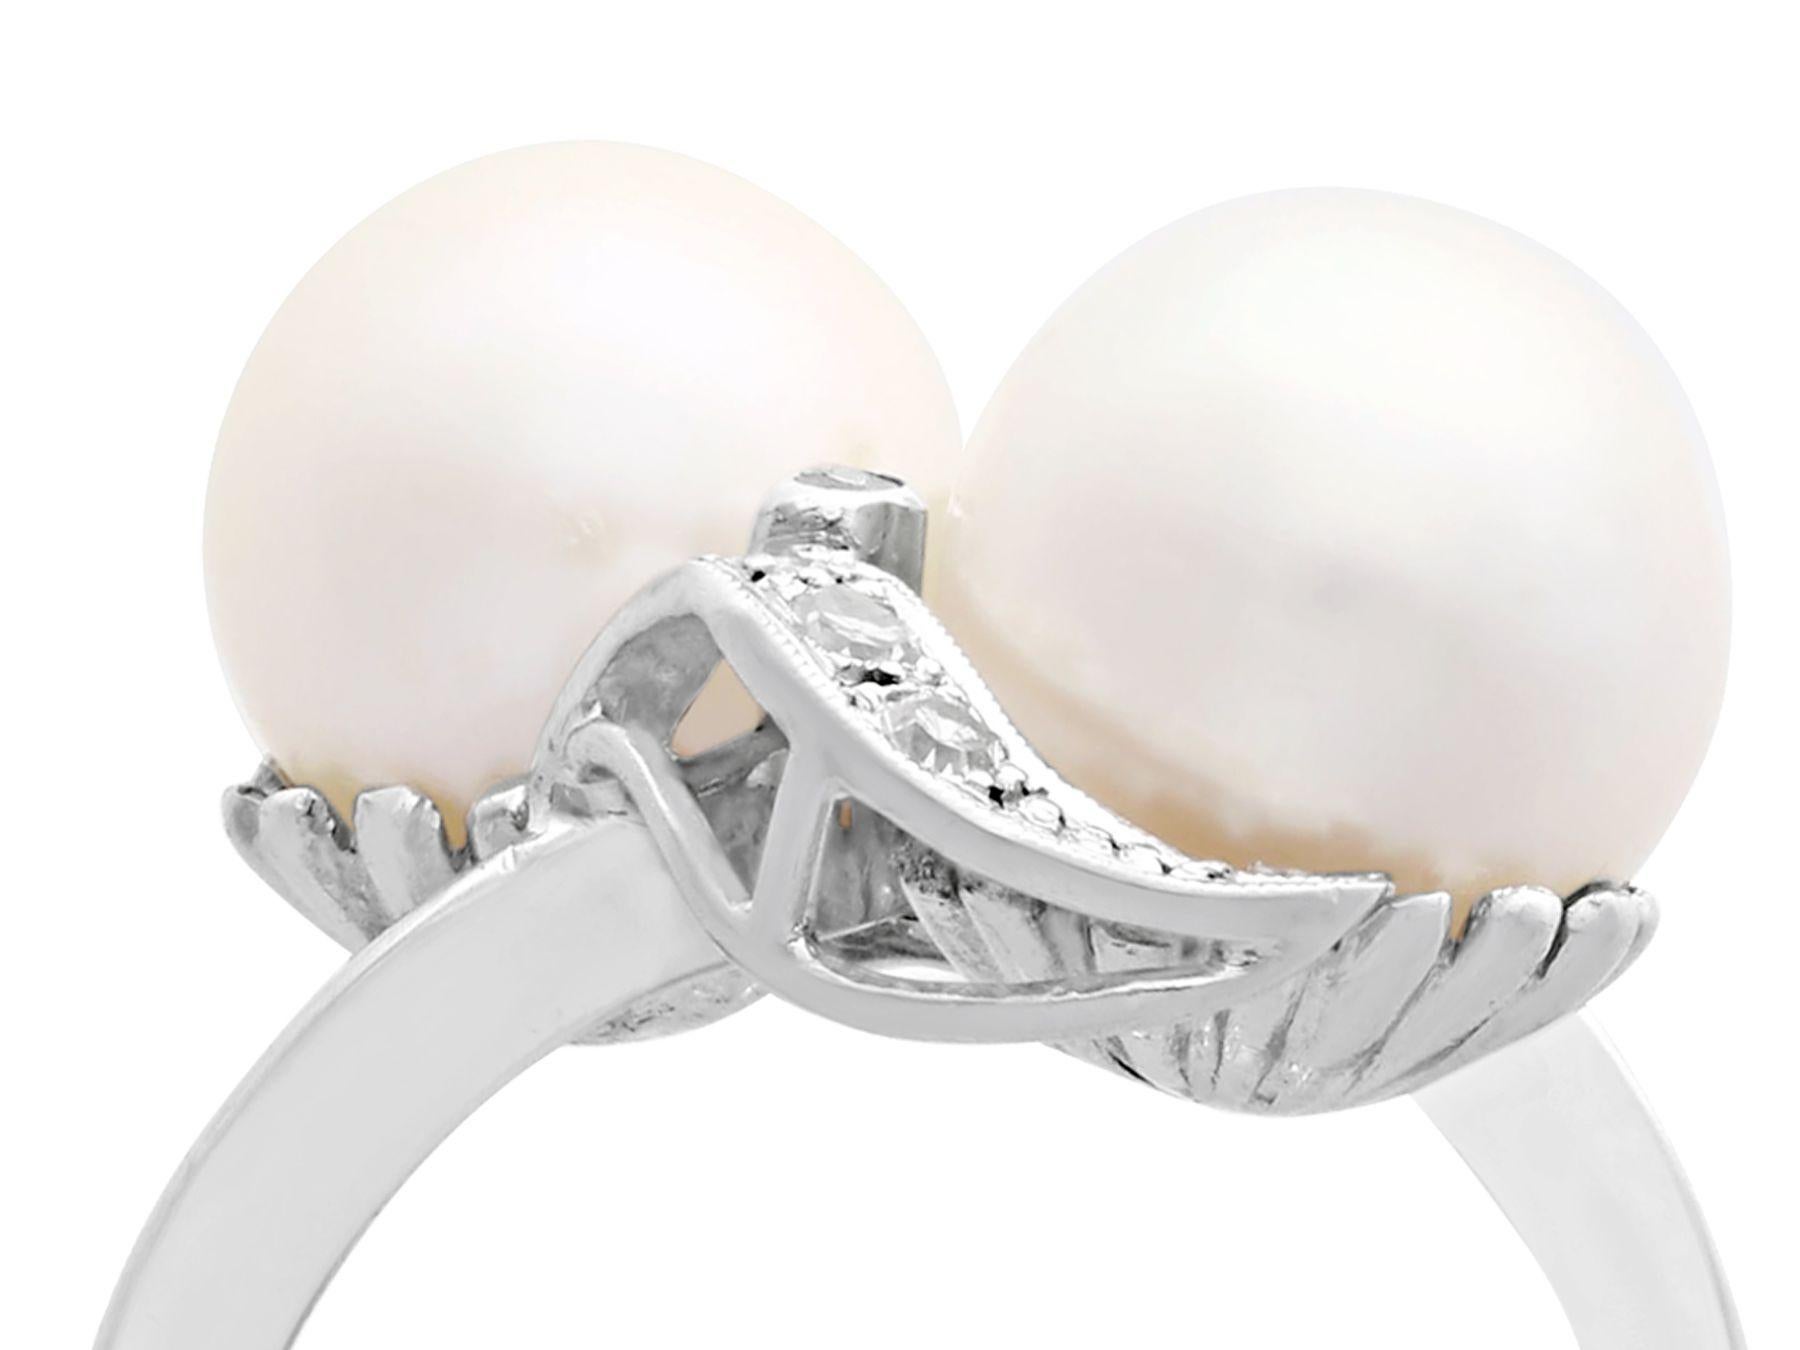 A fine and impressive cultured pearl and 0.12 carat diamond, 10 karat white gold twist design cocktail ring; part of our diverse jewelry and estate jewelry collections.

This fine and impressive pearl and diamond cocktail ring has been crafted in